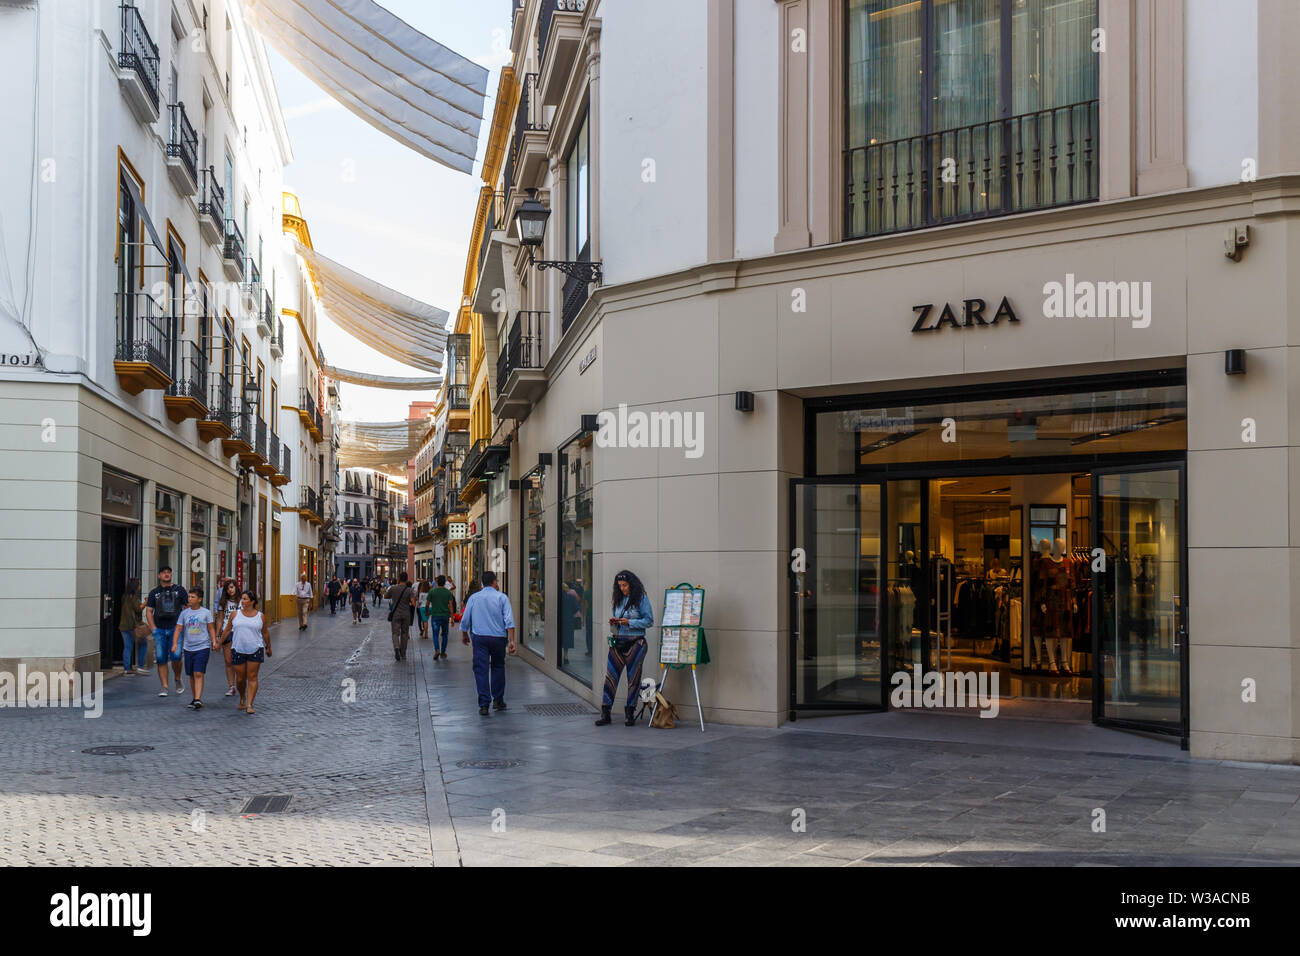 Seville, Spain - September 3rd 2015: Shopping street with a Zara store. Zara  is the main brand of the Inditex group Stock Photo - Alamy